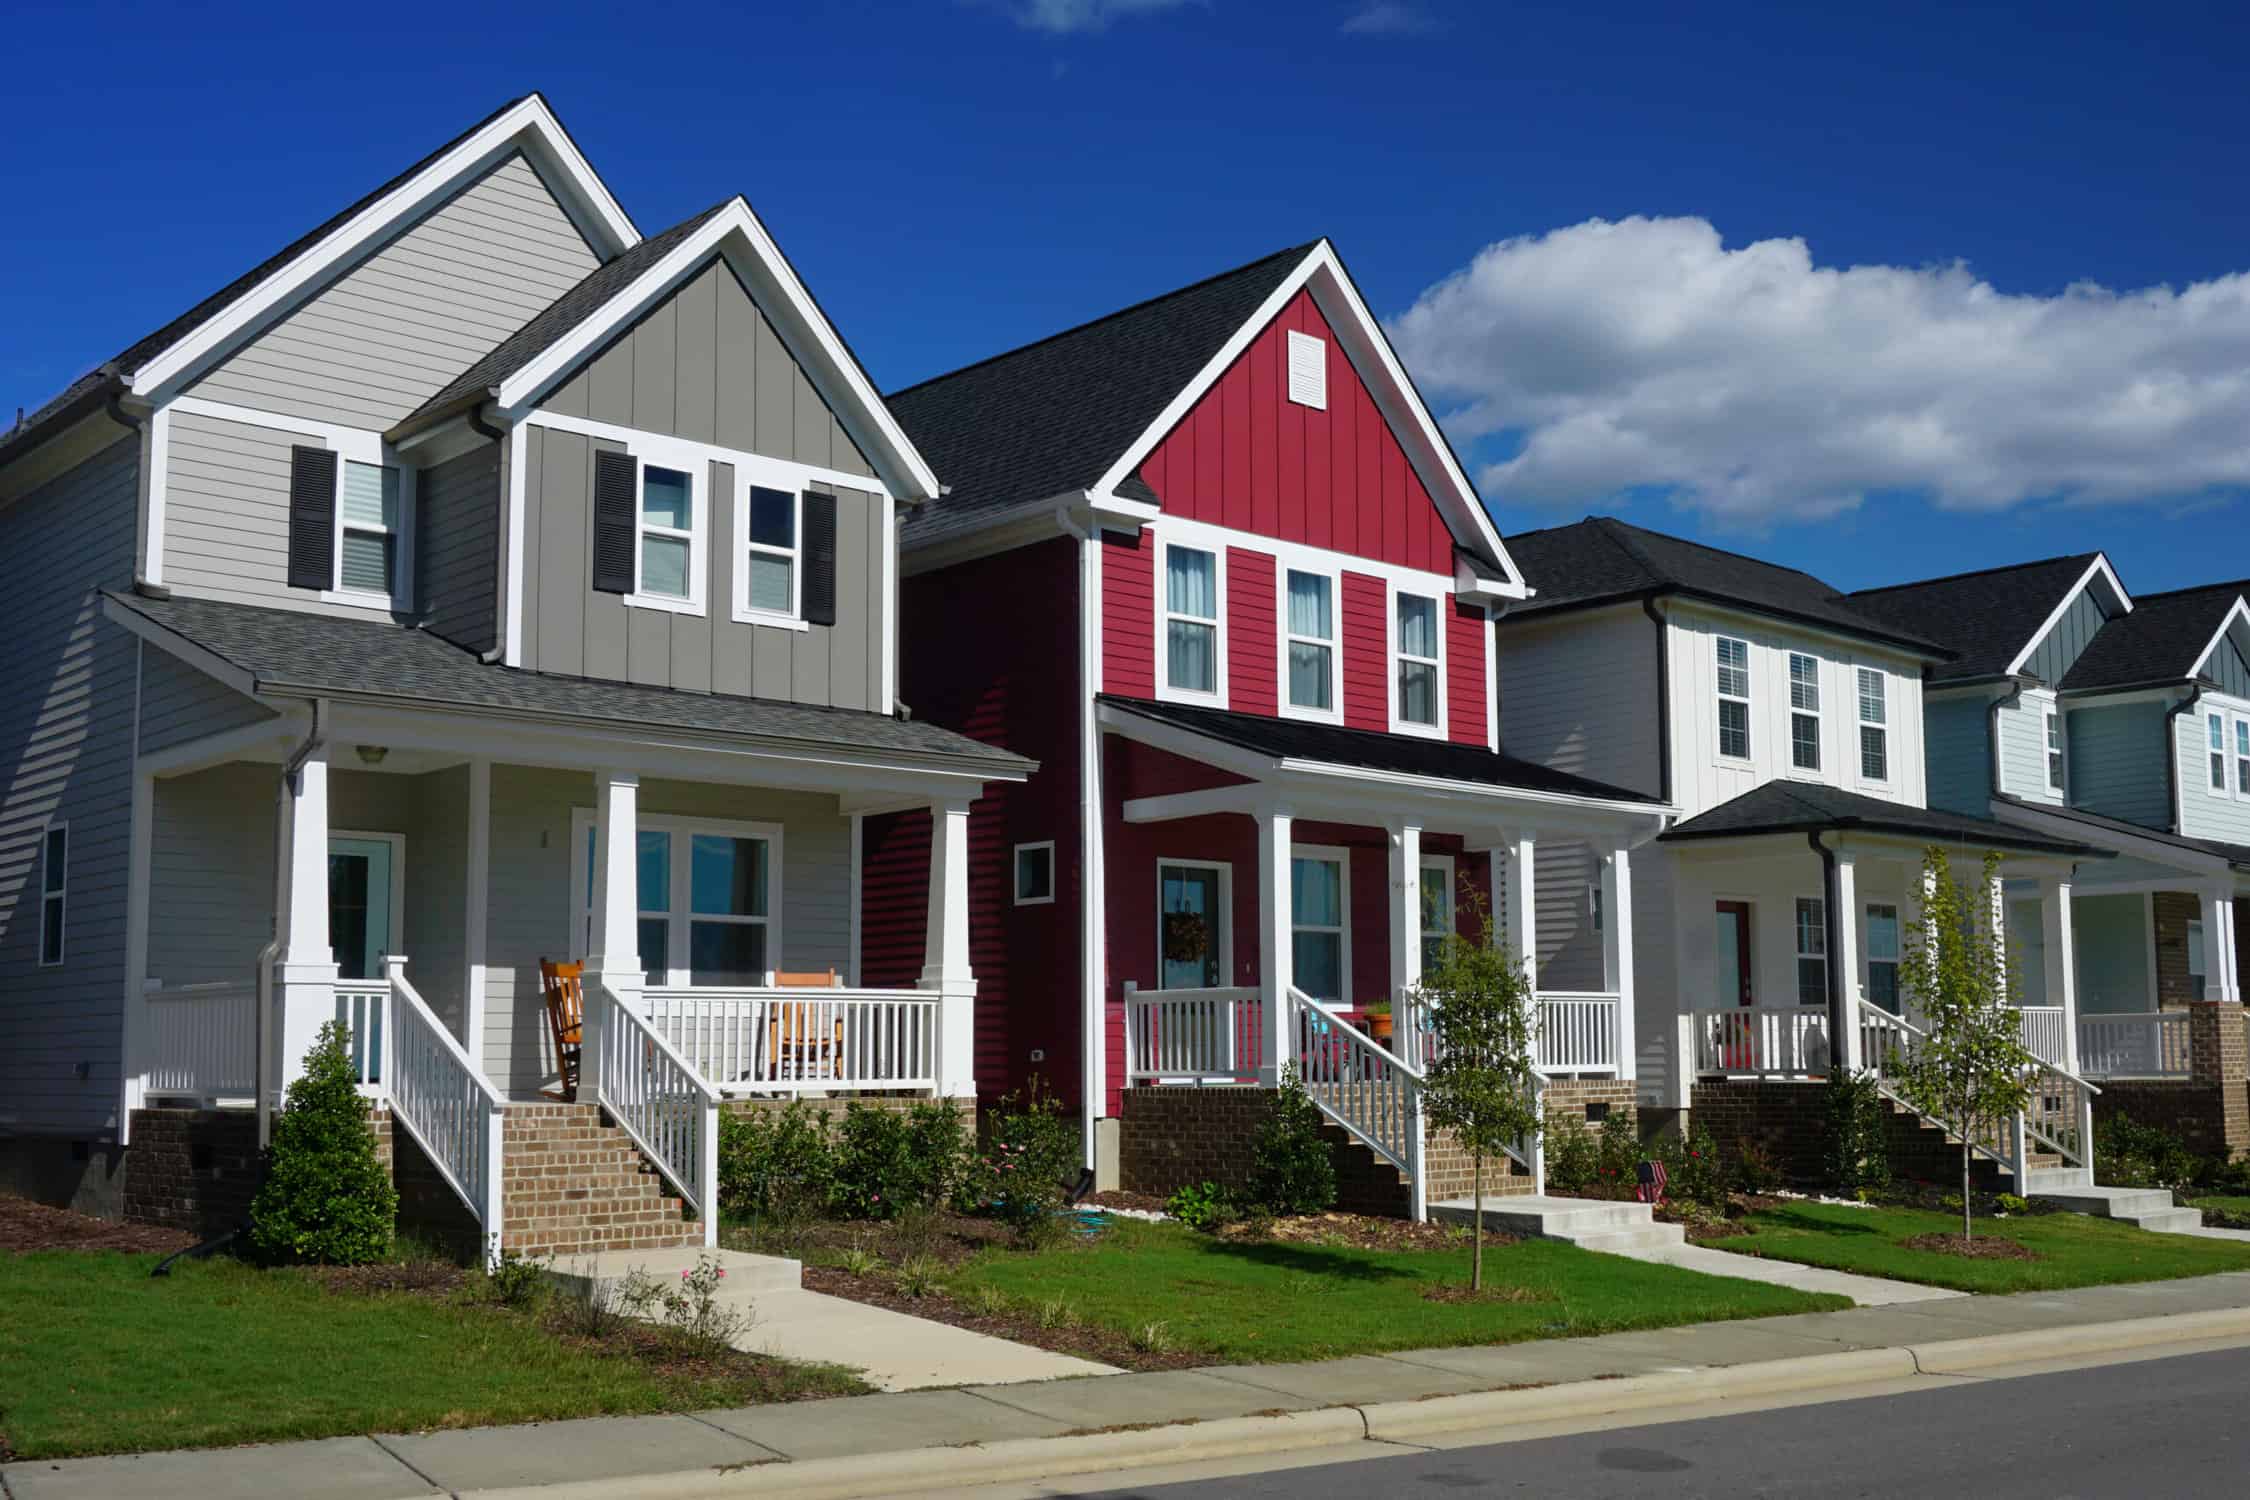 Red and Gray Row Houses in Suburbia- House Painting Services in Fort Collins, CO